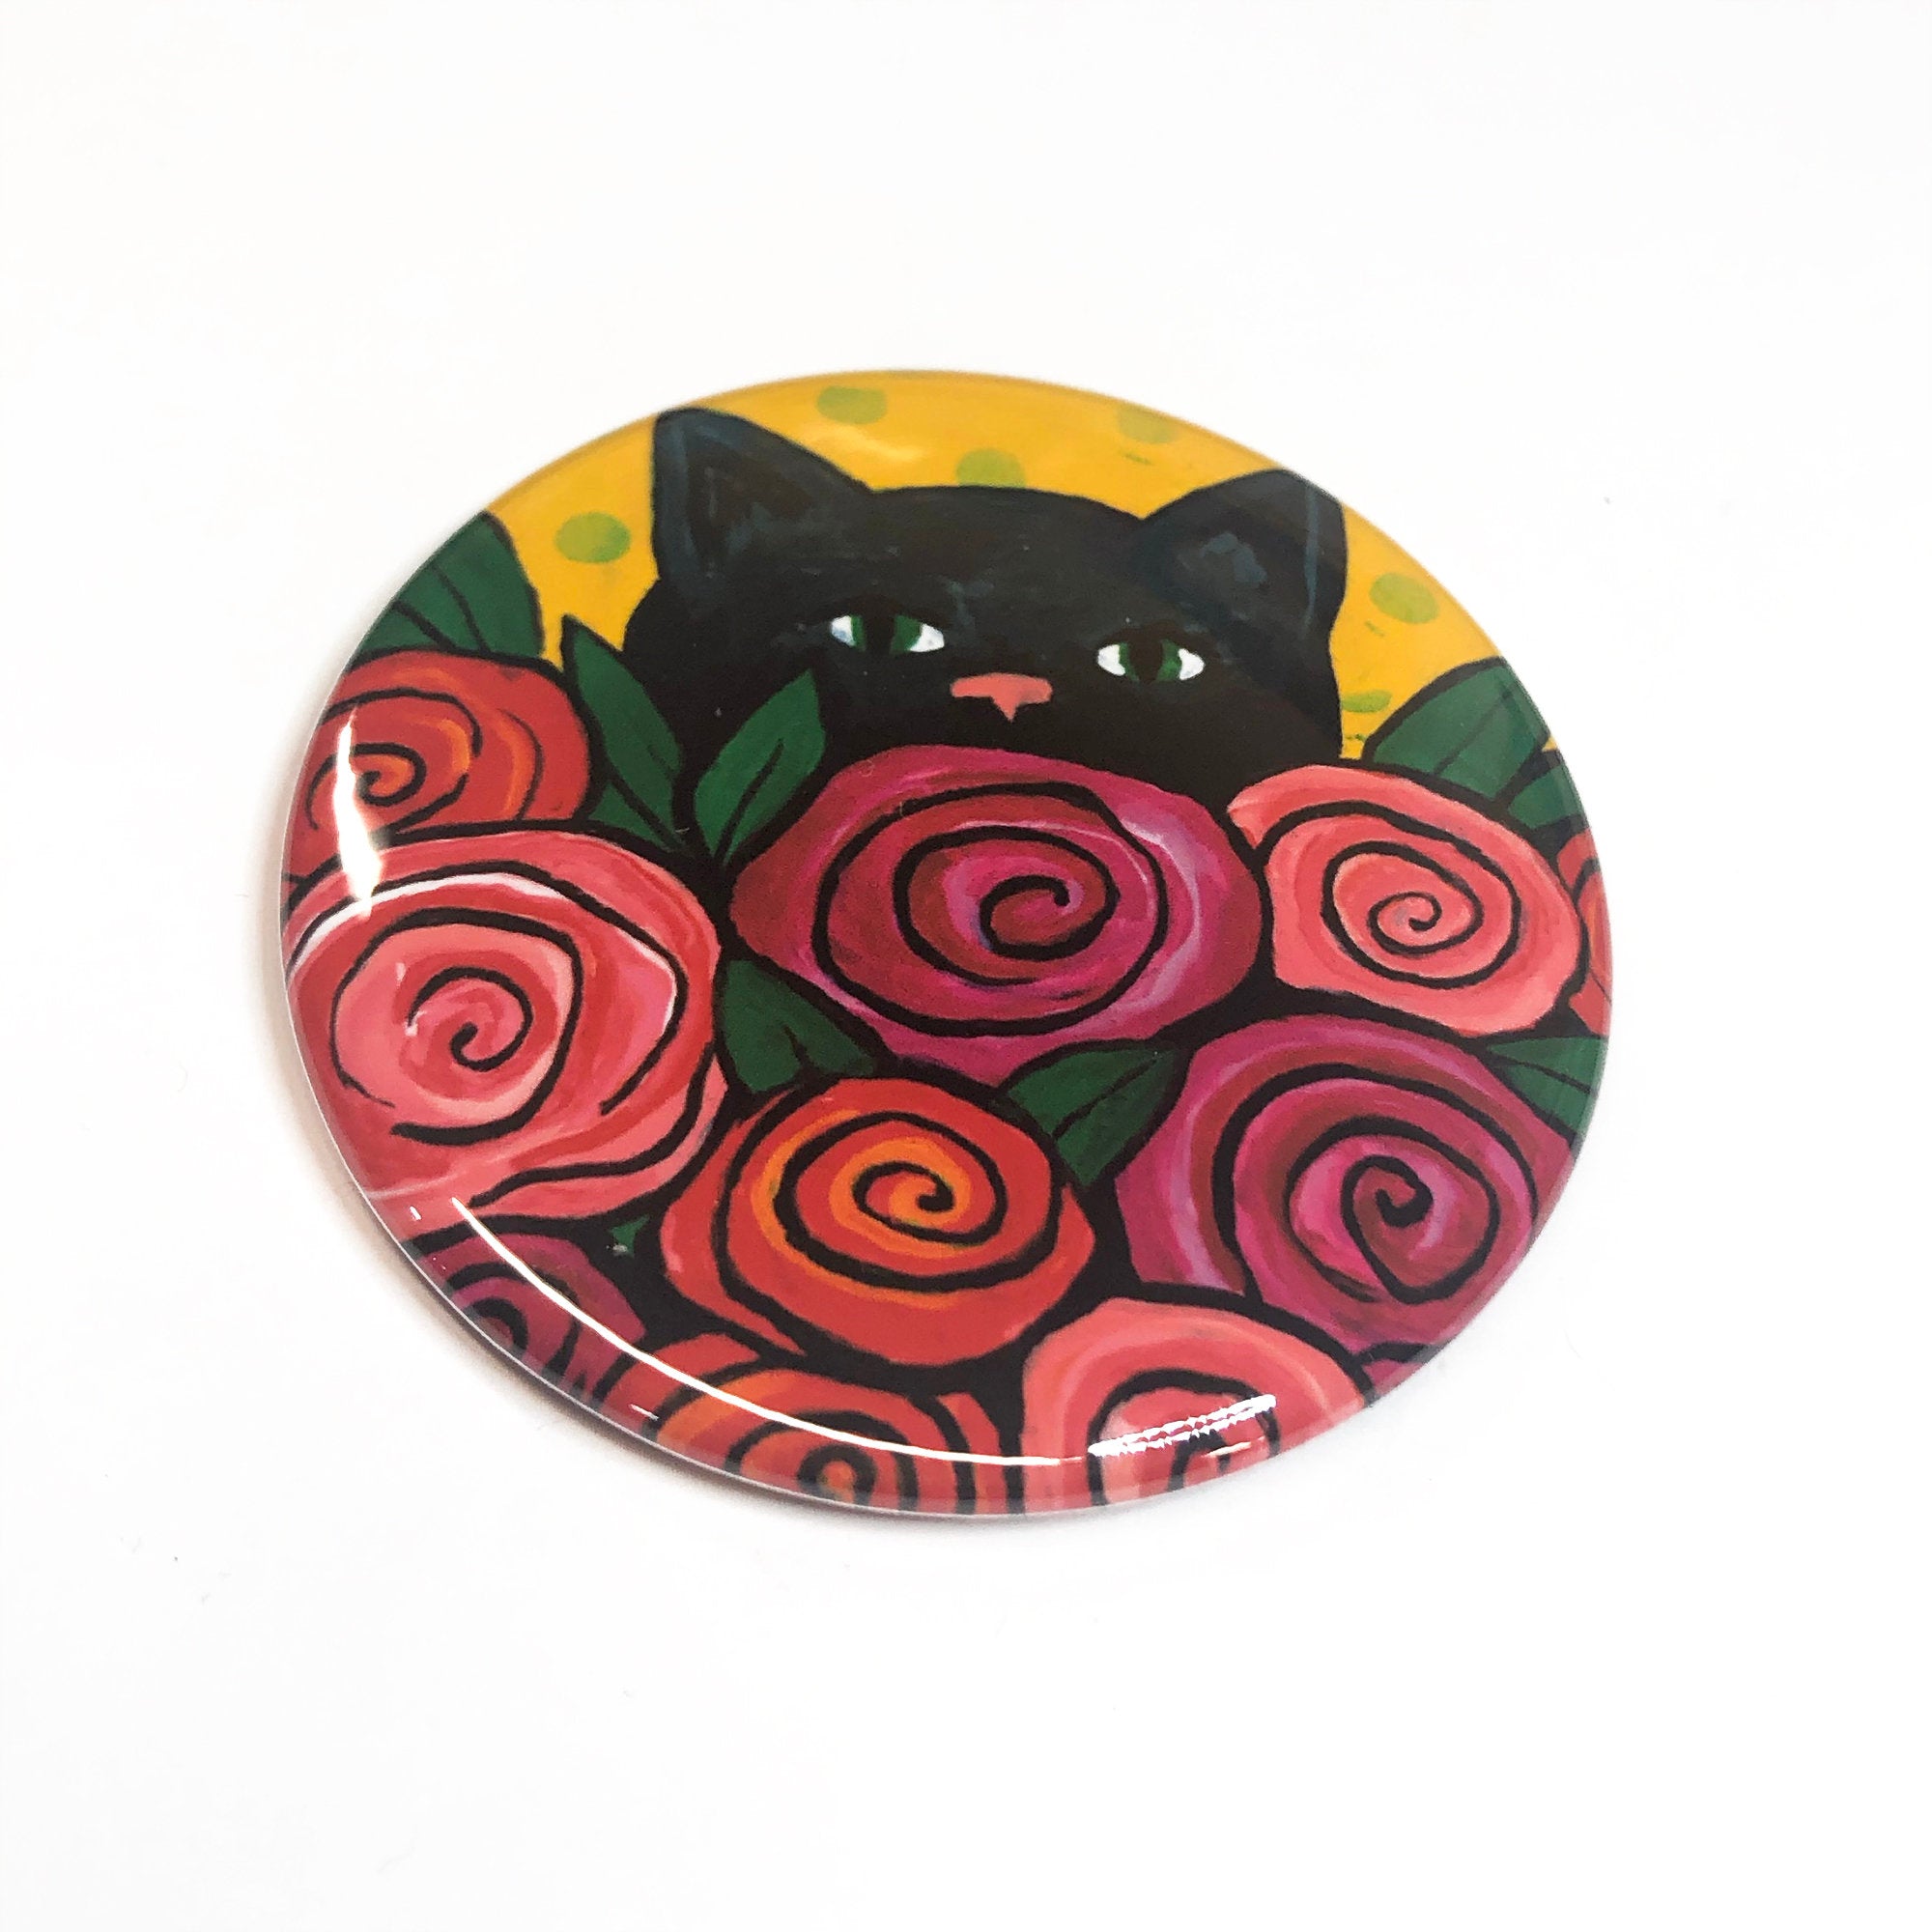 Black Cat Magnet, Pin Back Button, or Pocket Mirror - Rose Kitty - Cat Lover Gift